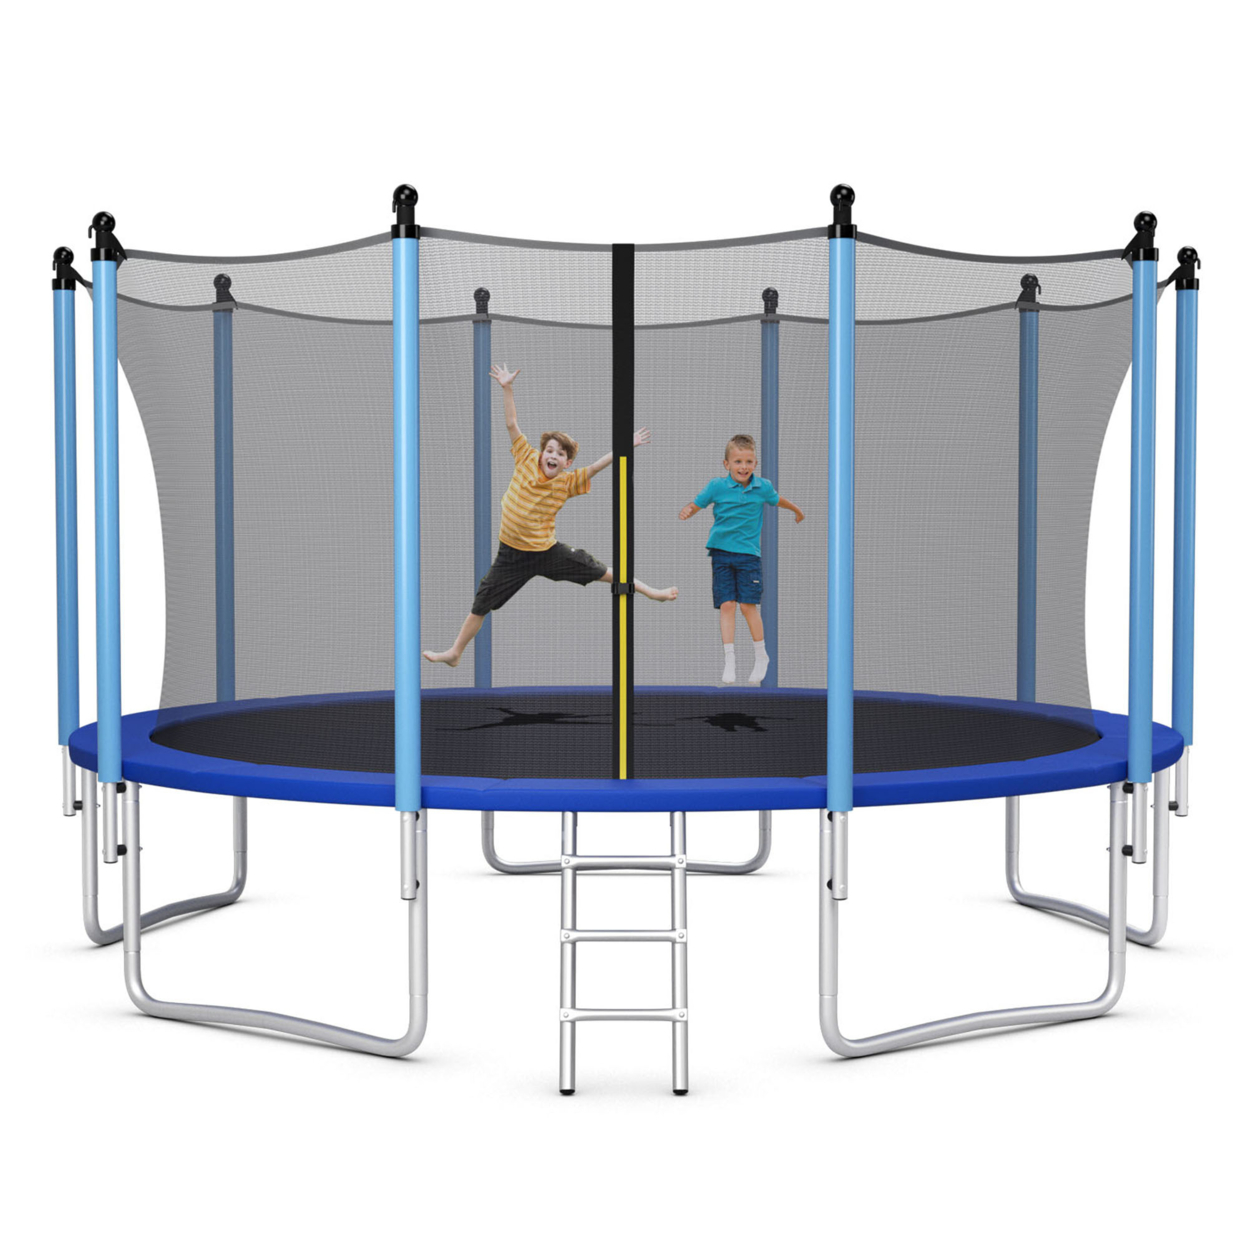 8/10/12/14/15/16FT Jumping Exercise Recreational Bounce Trampoline For Kids W/Safety Enclosure - 15 Ft